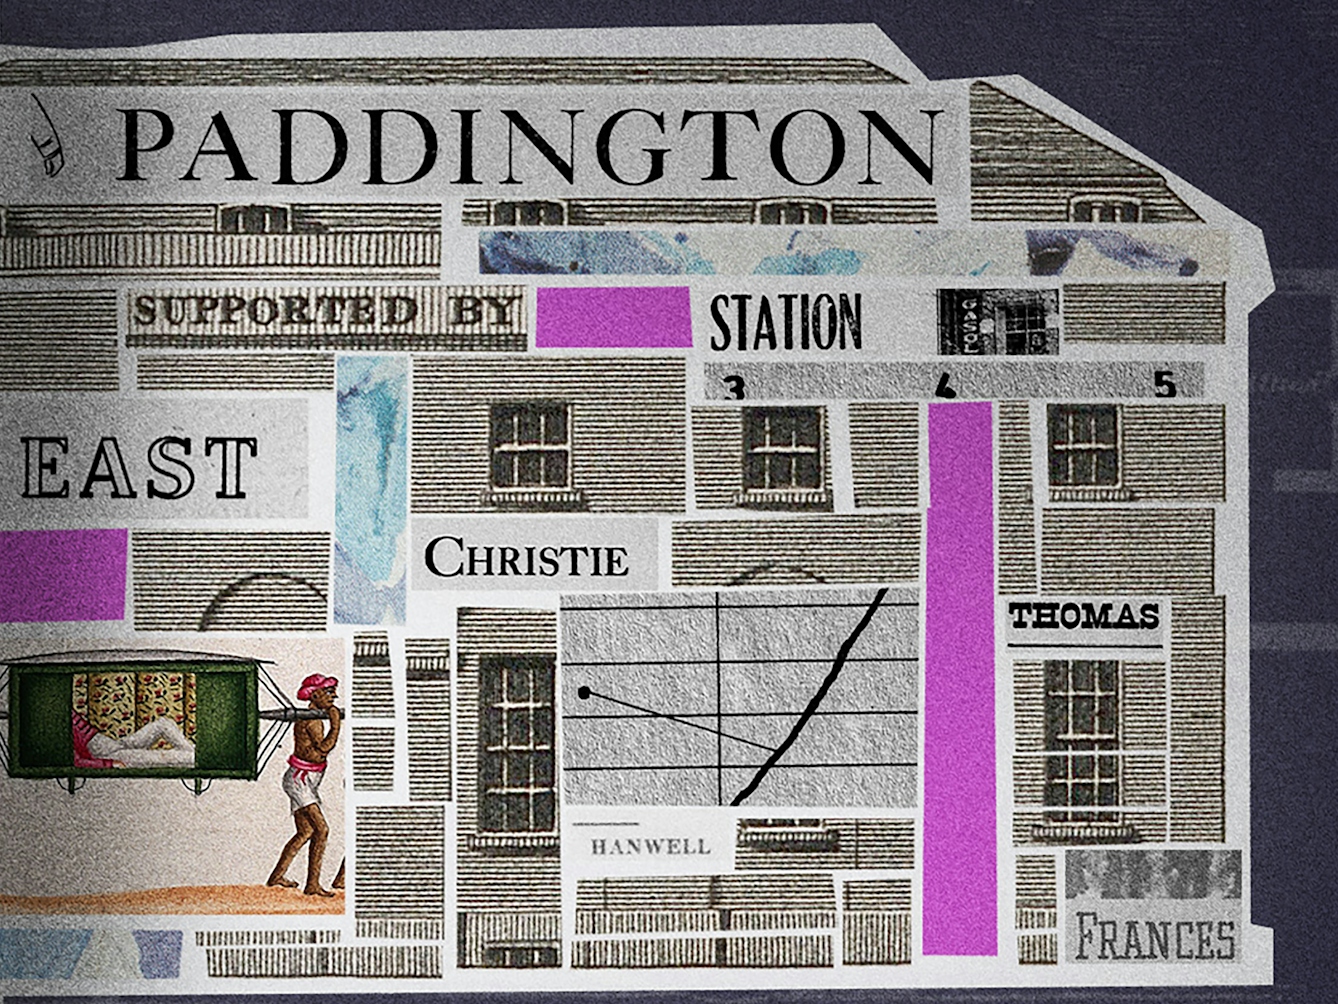 Crop from a larger digital collage. Shown is a building, labelled 'Asylum, Kent Road, London'. The building's interior is filled with different collage elements, including newspaper cut-outs reading 'Asylum... for the... and dumb', 'Paddington', 'Insanity'. There are three different images of the sun in the centre of the asylum. There is a black and white map of India and a number of windows. 